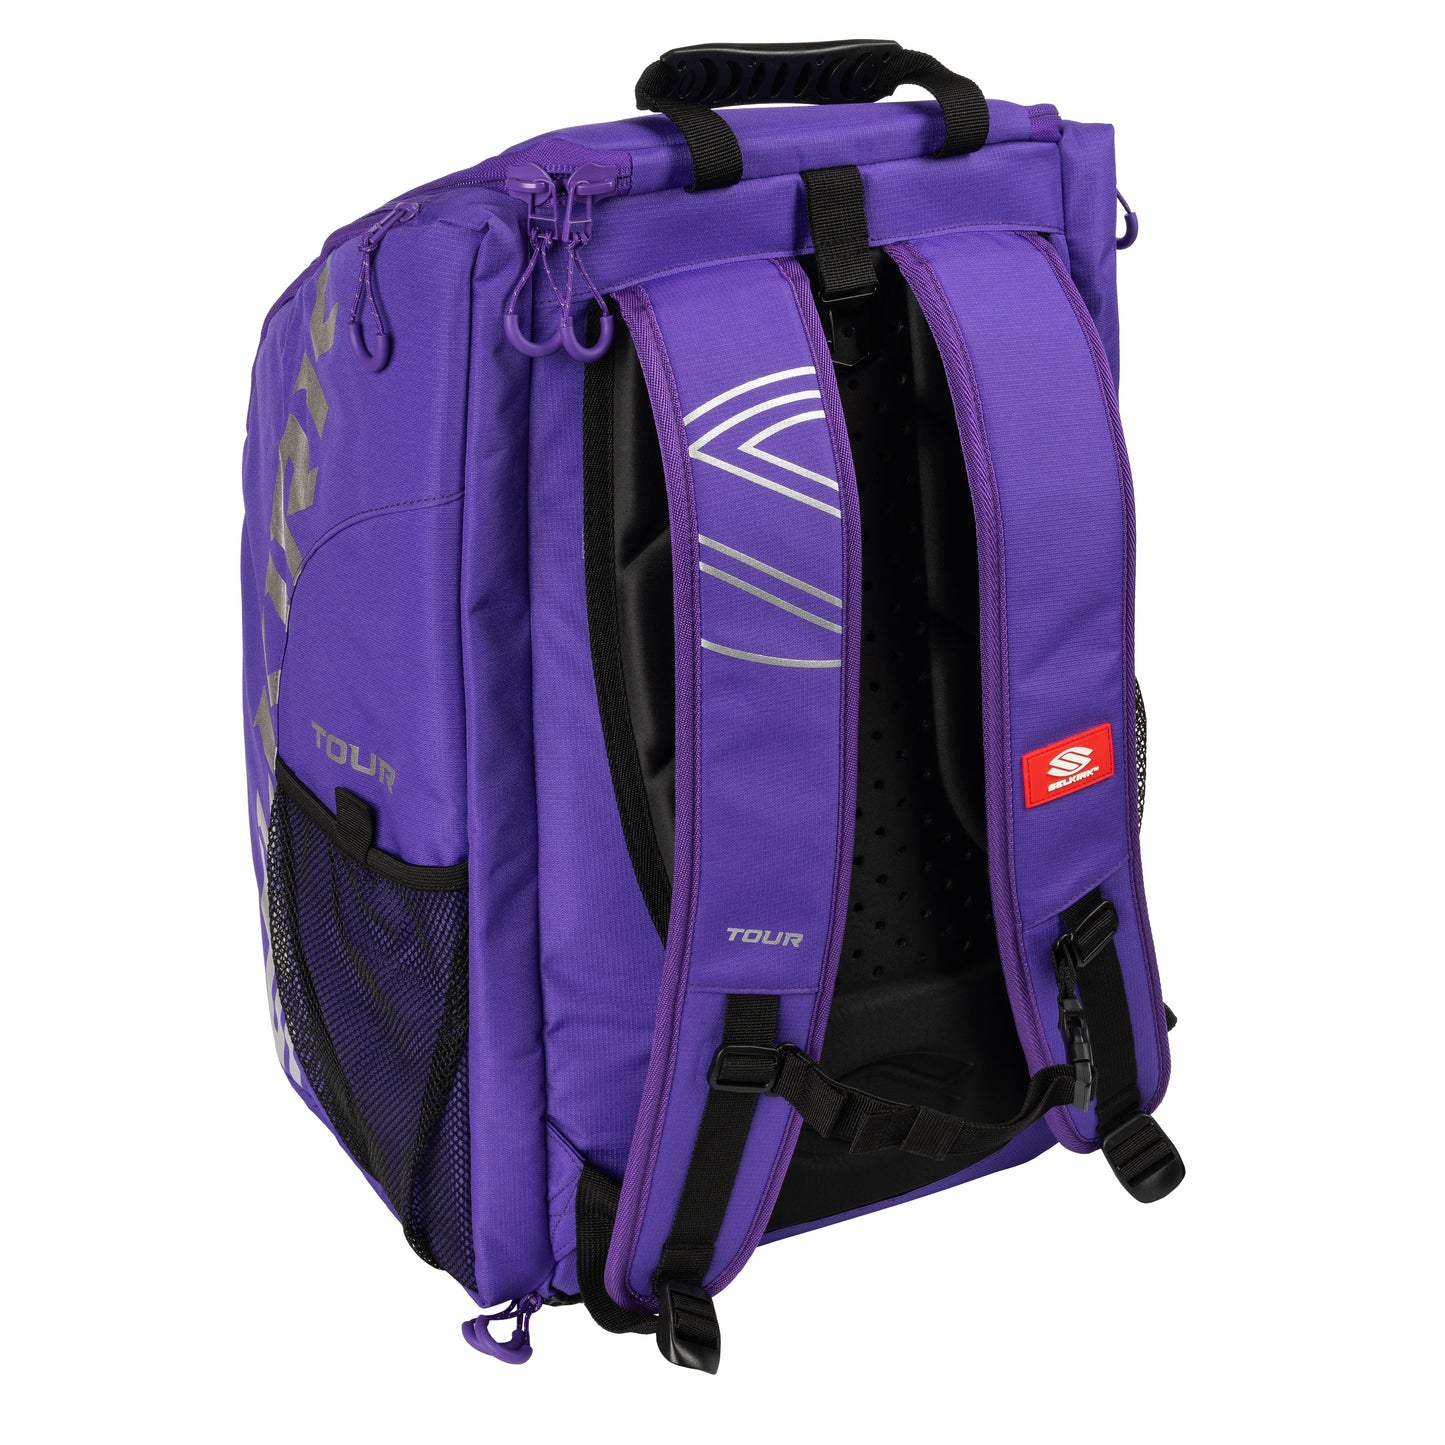 A Selkirk Core Series Tour Backpack Pickleball Bag with a black strap.